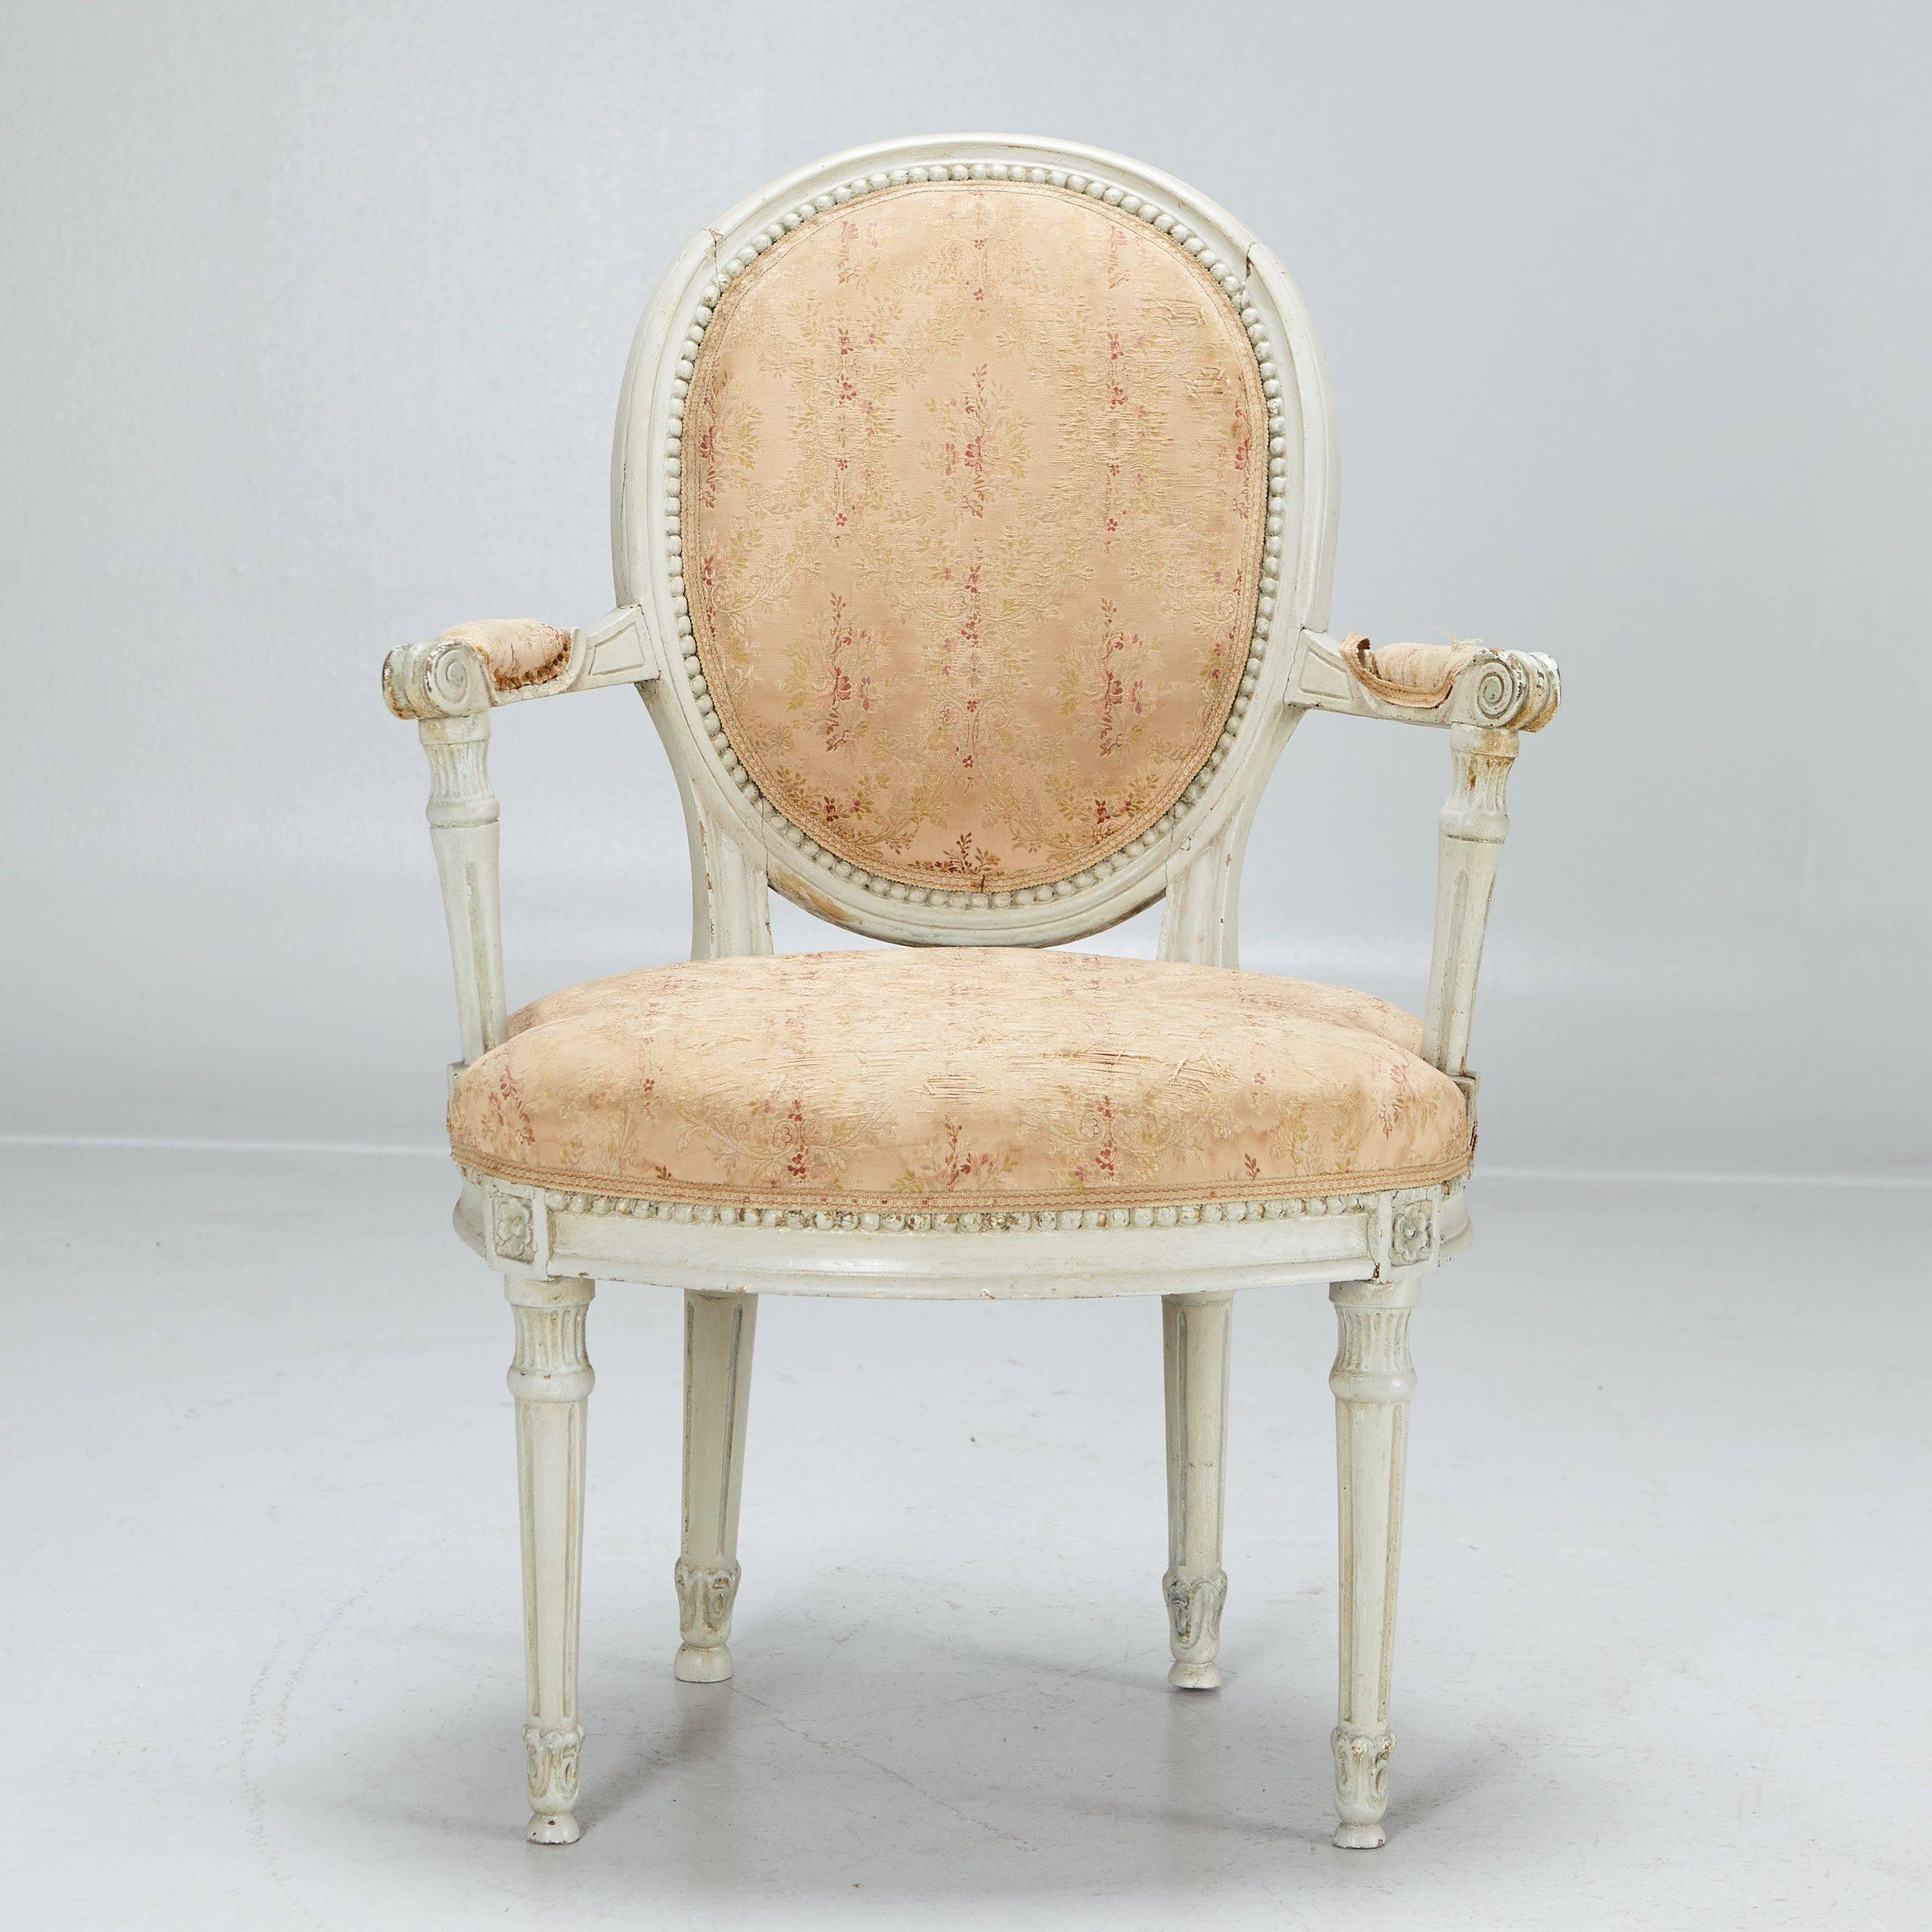 Armchair Louis XVI gray-painted, carved decoration, fluted legs, seat height 43 cm.
Restoration, new upholstery on request possible.